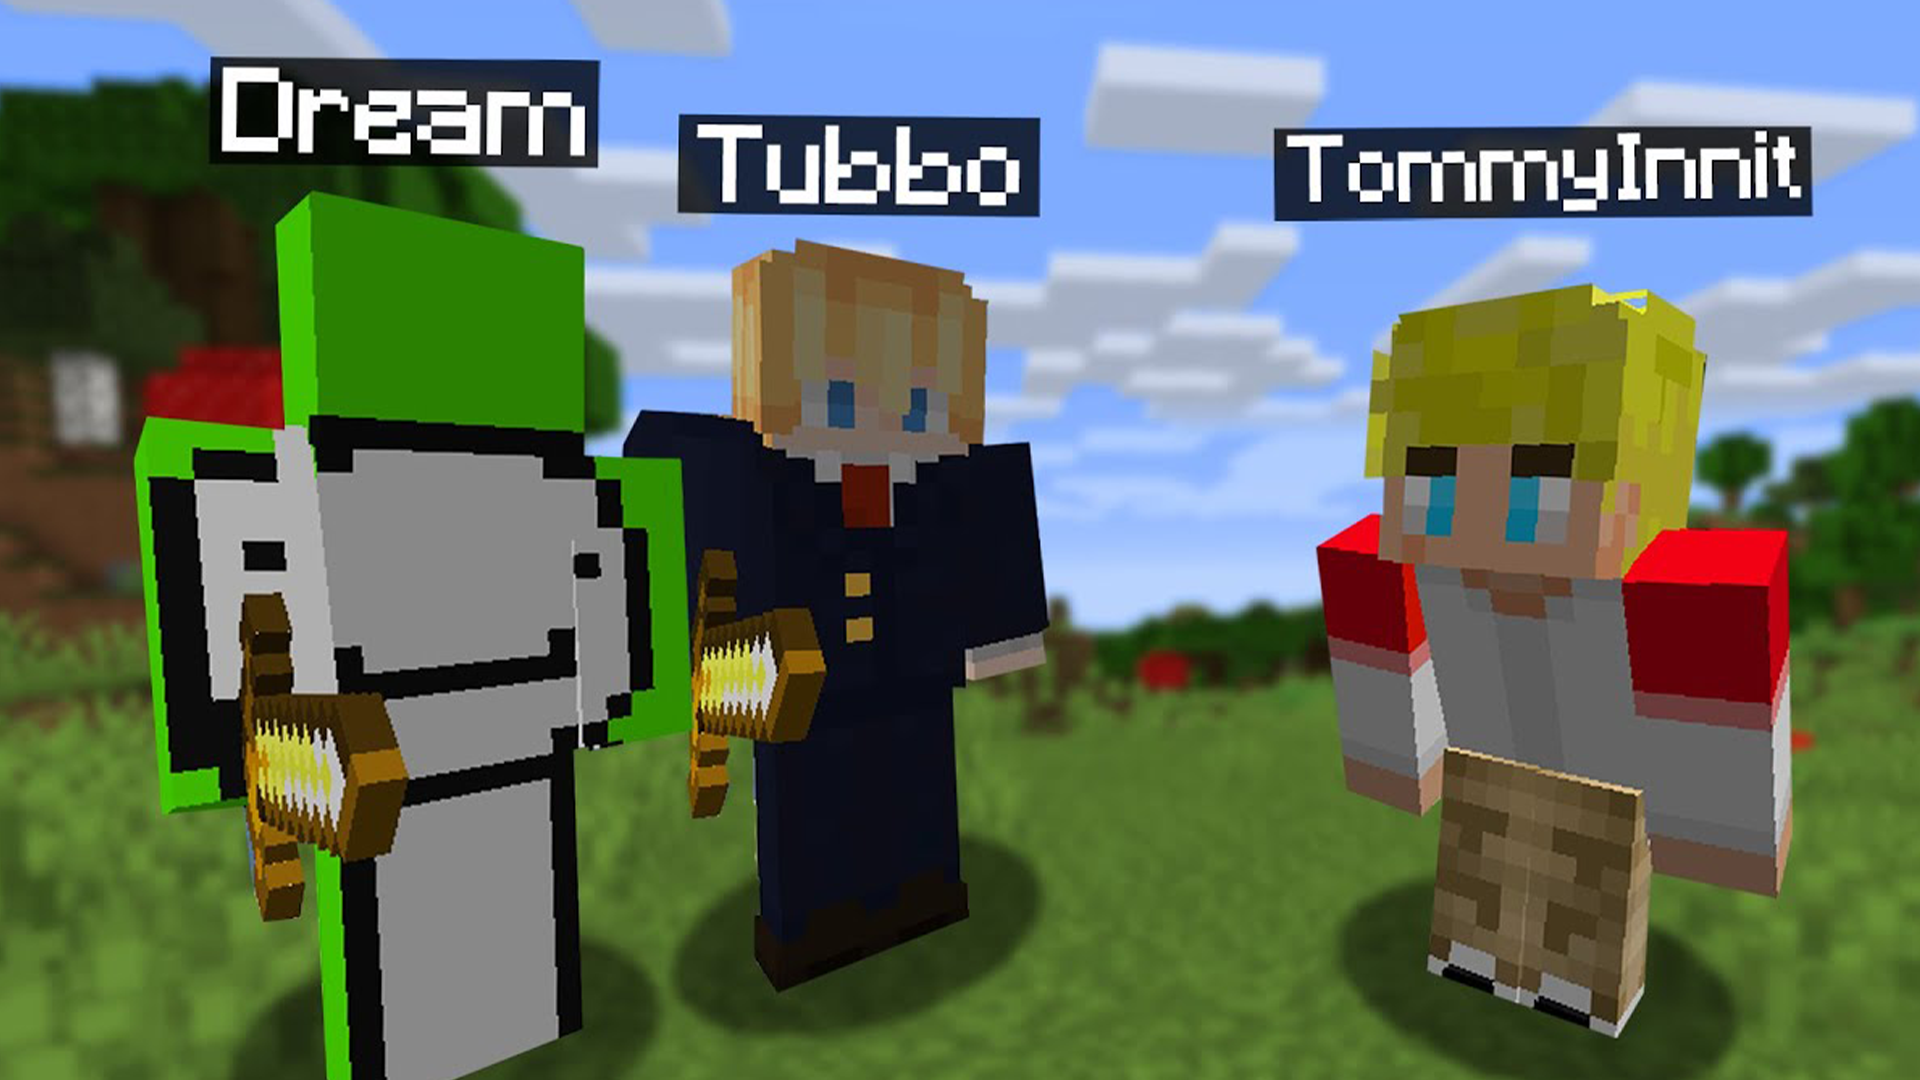 What's Tubbo real name?